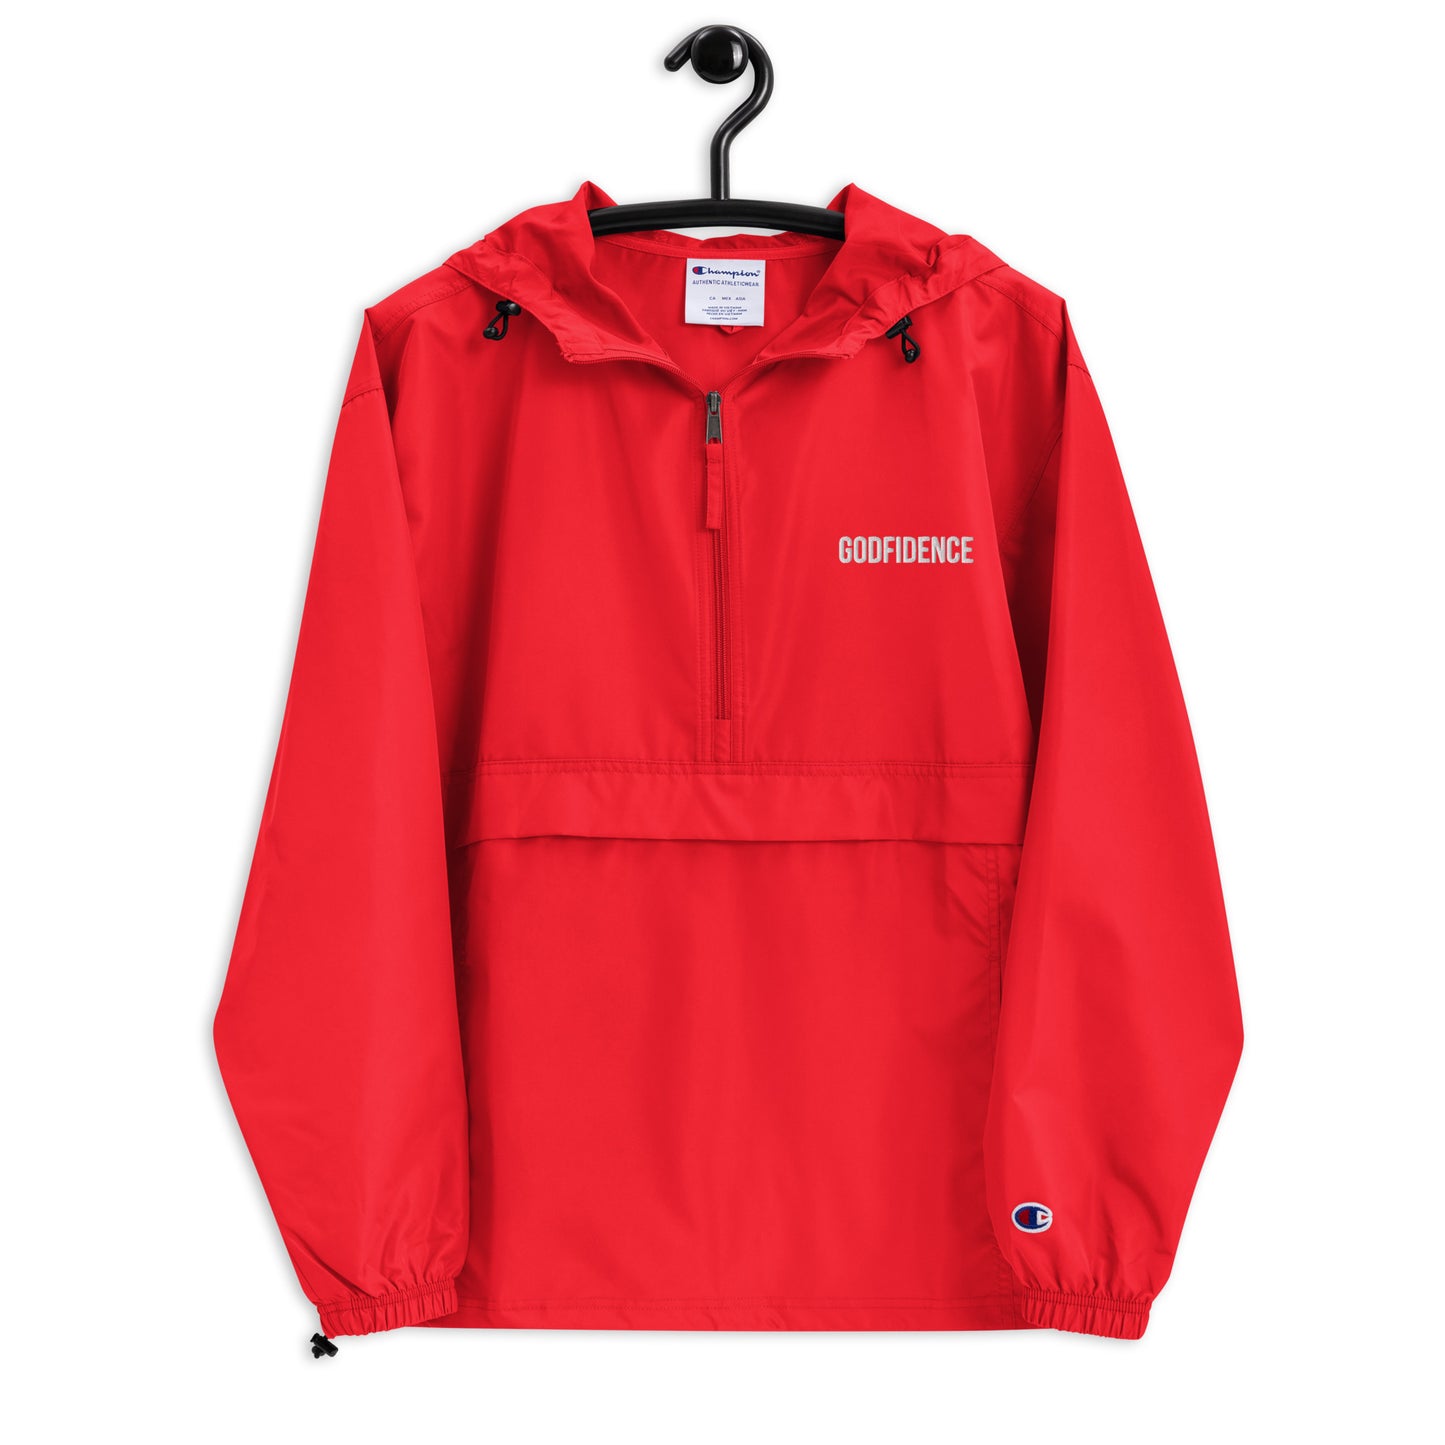 Godfidence Embroidered Champion Packable Jacket